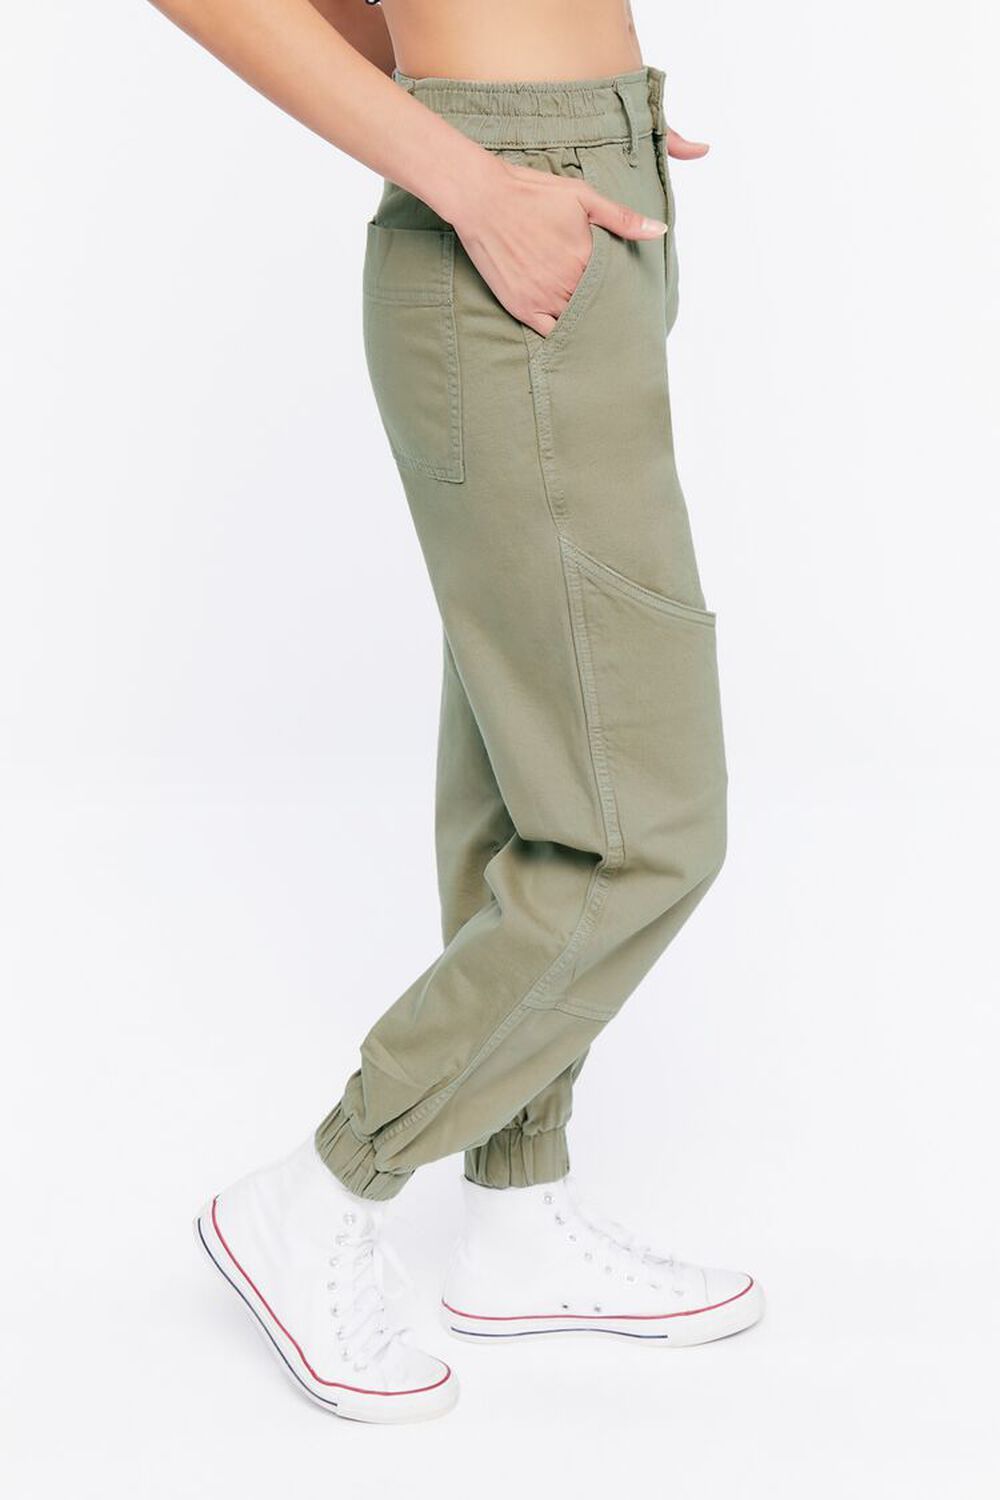 OLIVE Pocket High-Rise Twill Joggers, image 3